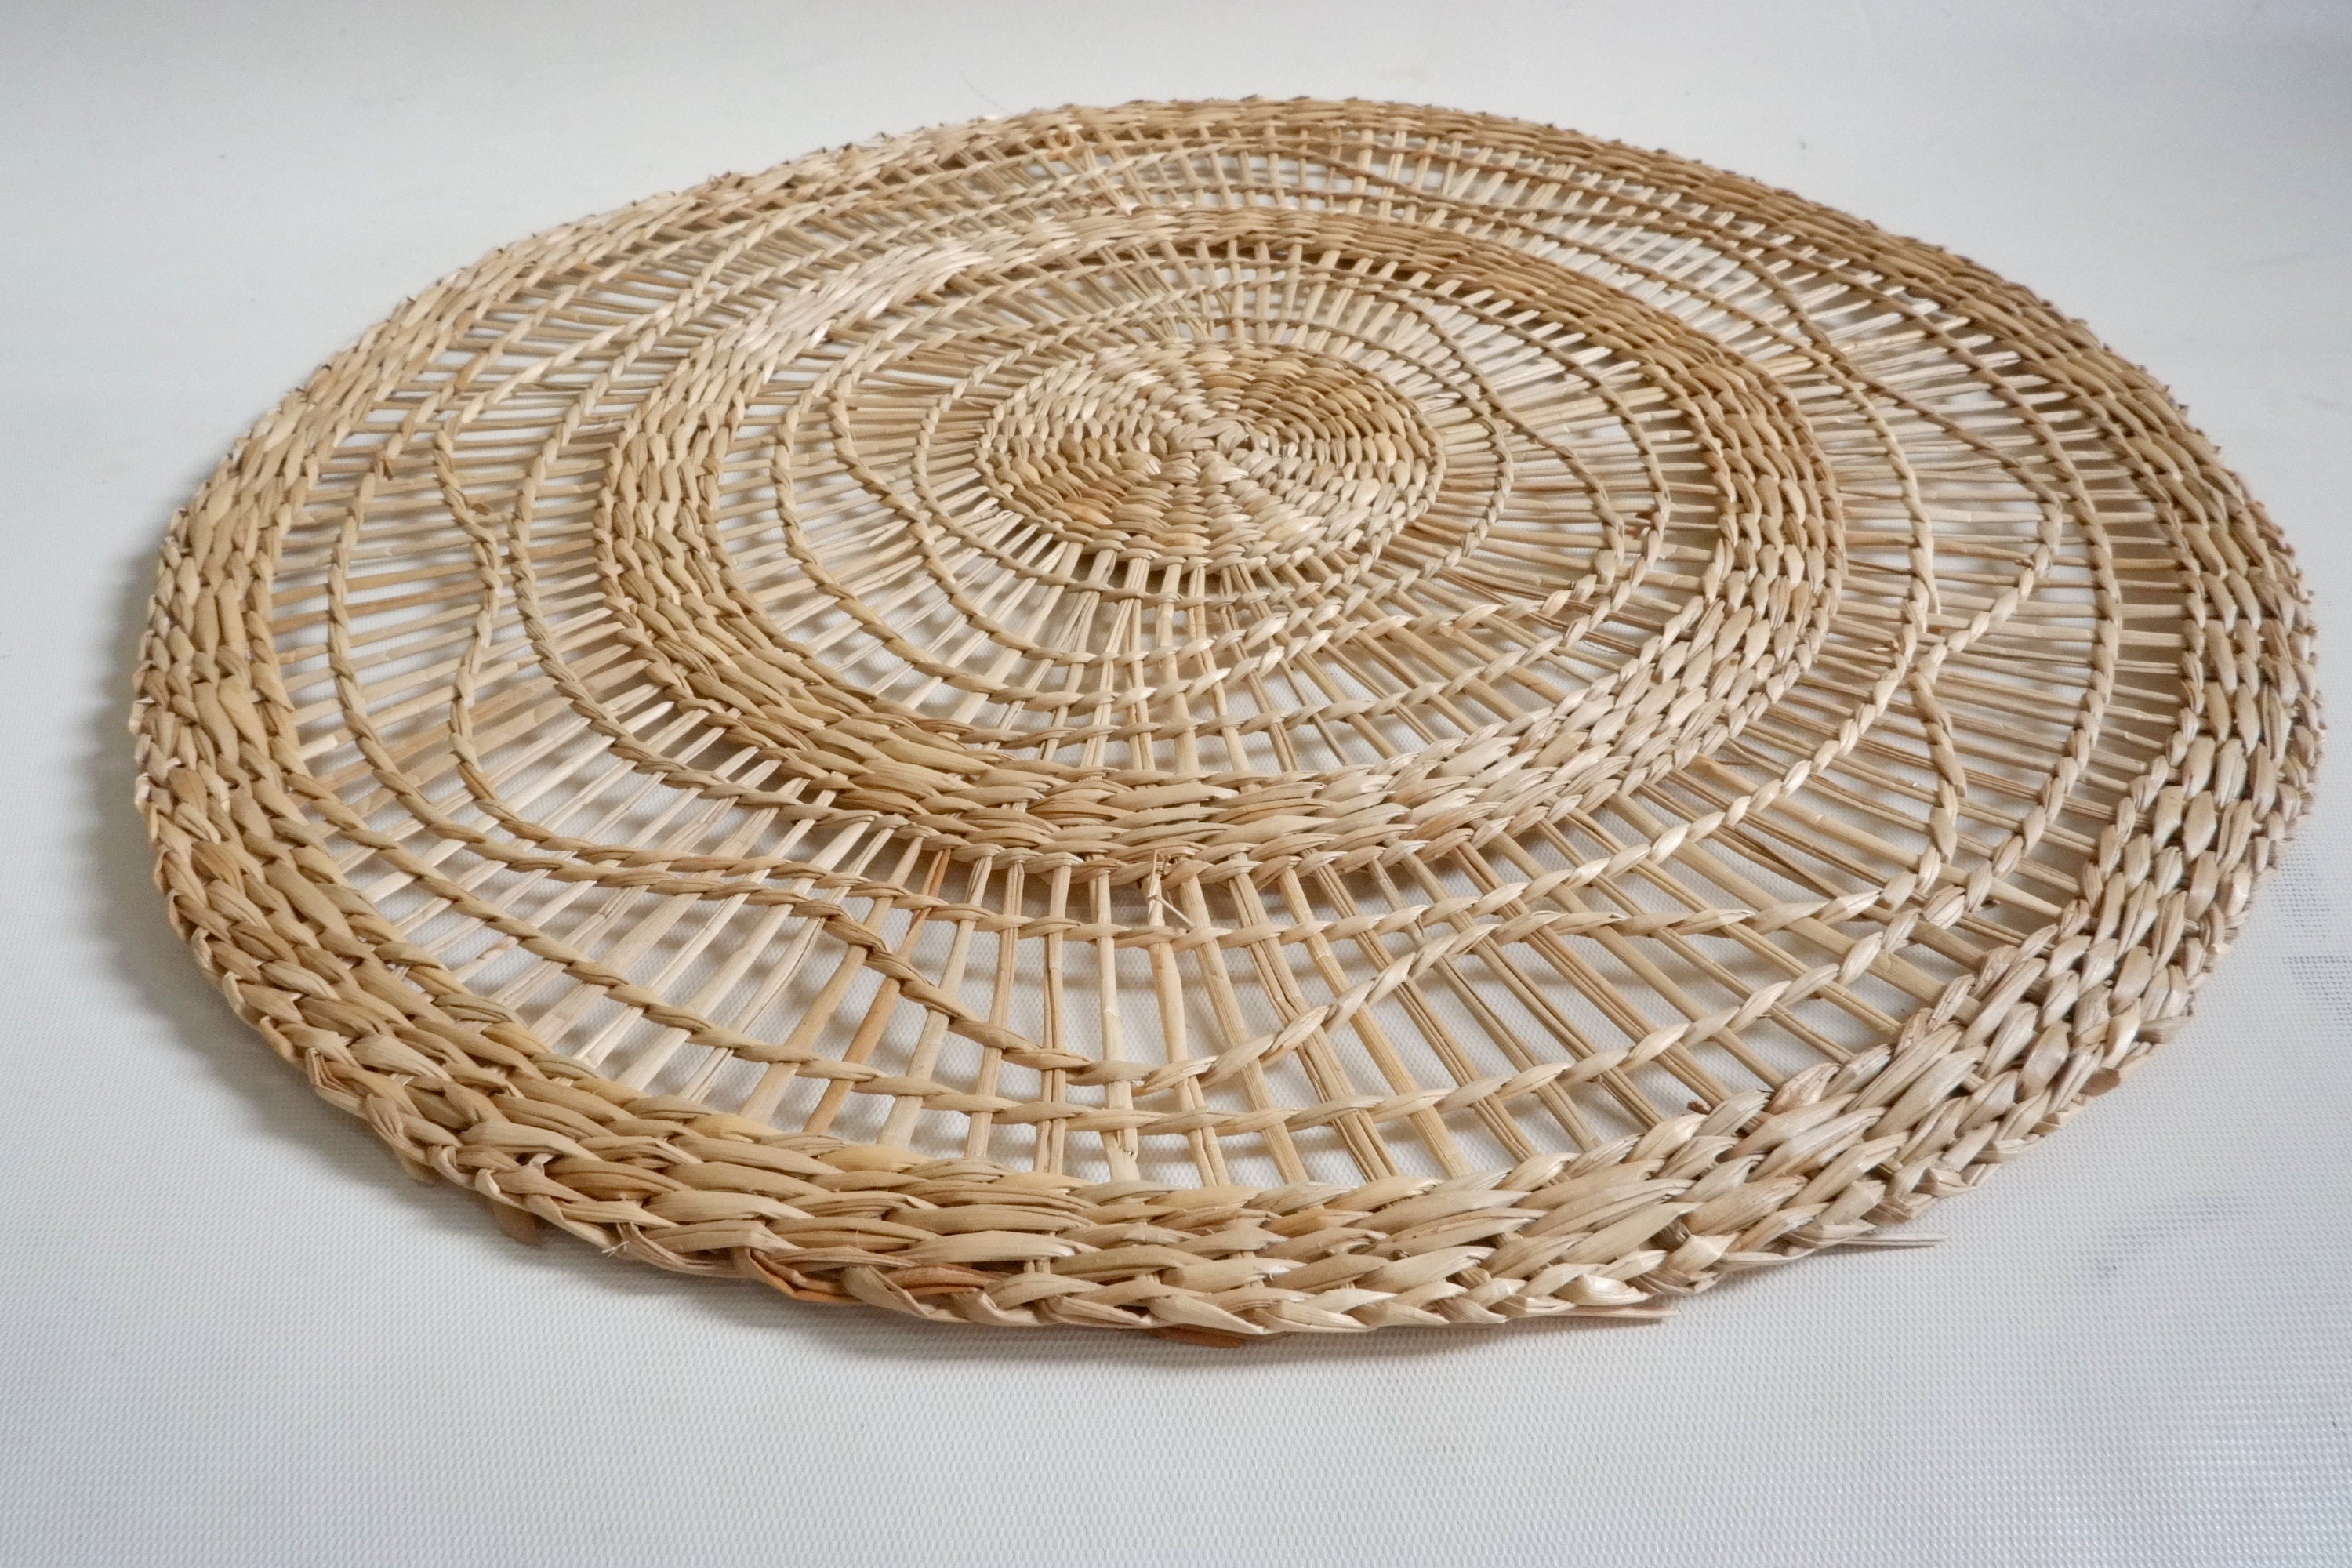 Woven wicker placemats - Natural set of 4